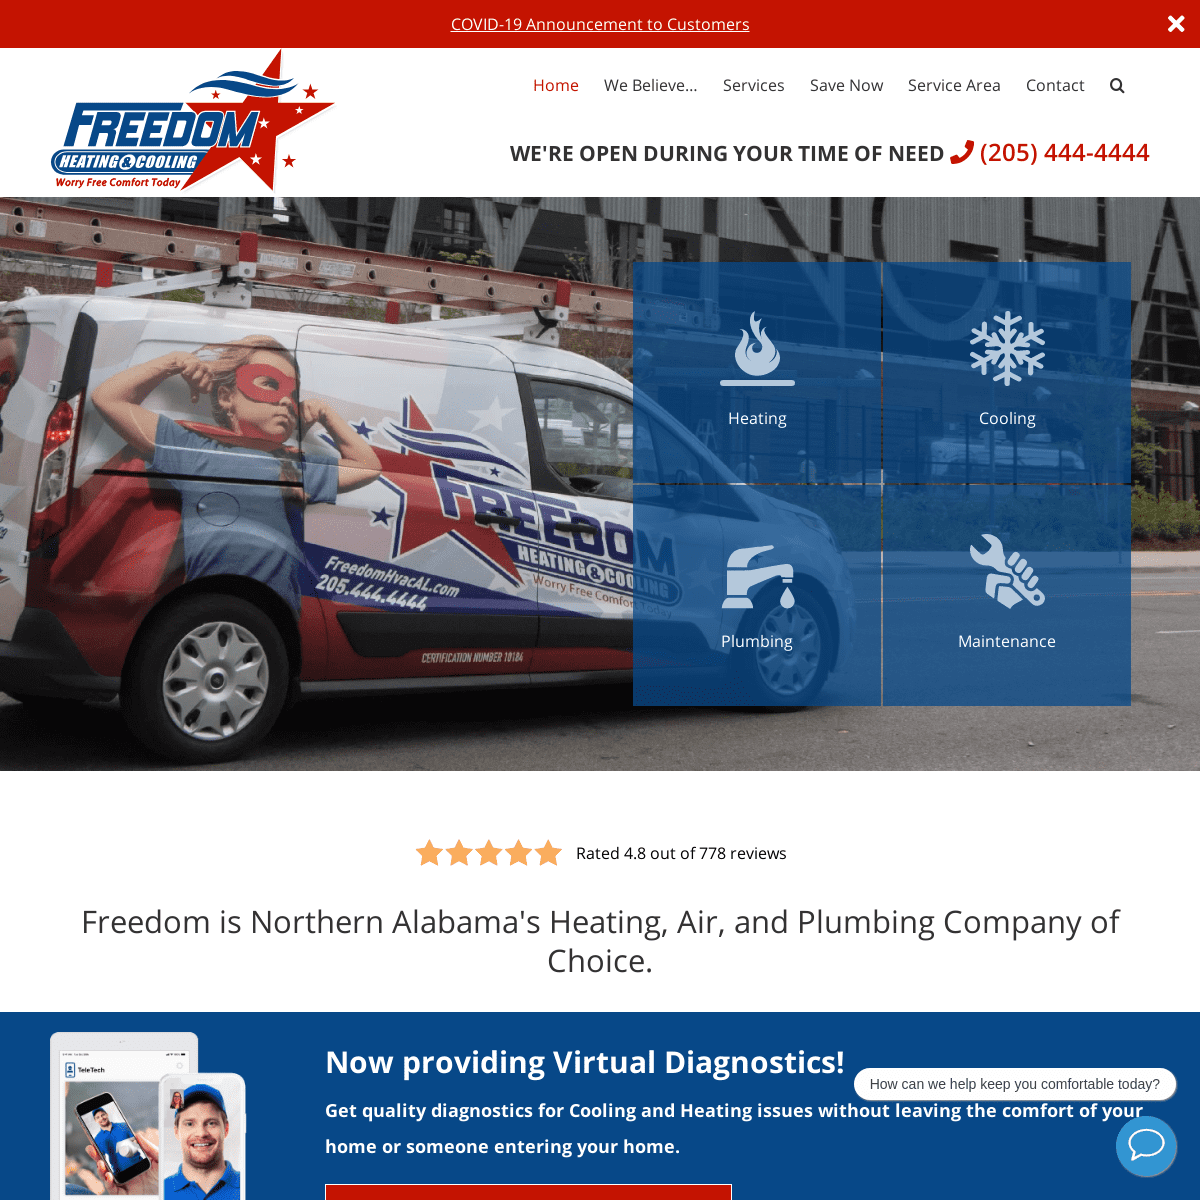 A complete backup of freedomhvacal.com